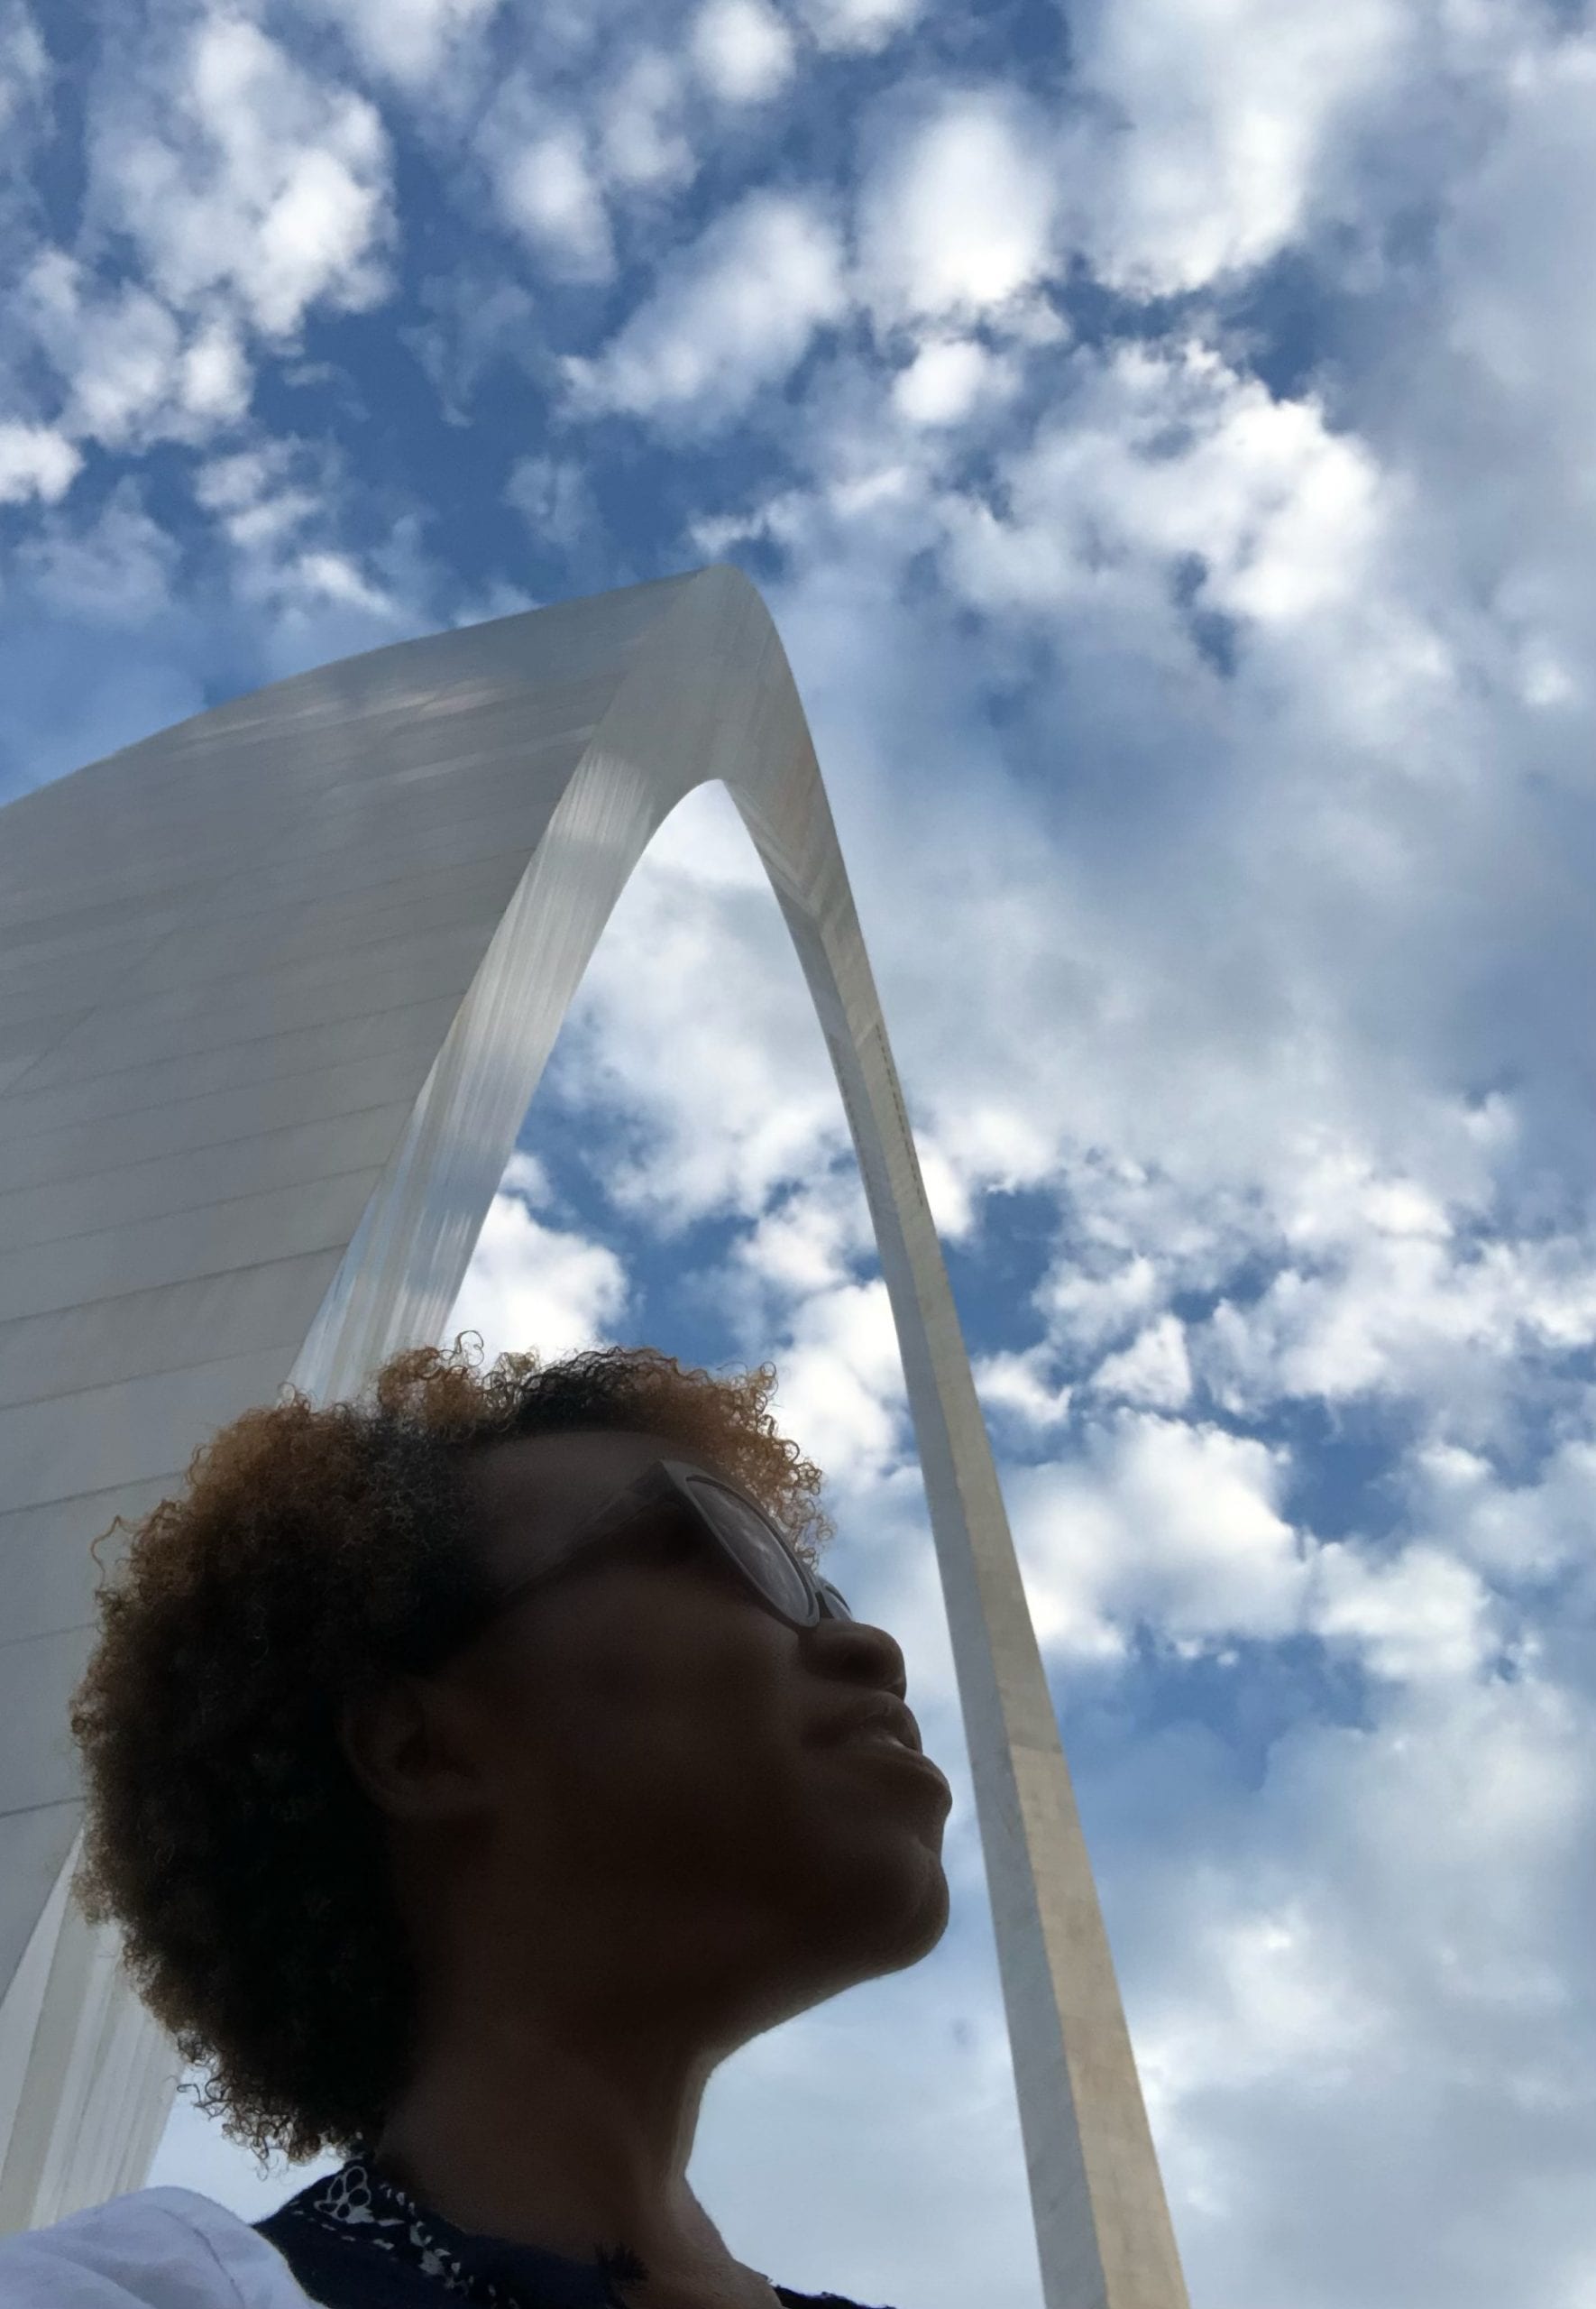 Destination:  The St. Louis Gateway Arch and Blues History – February 29, 2020